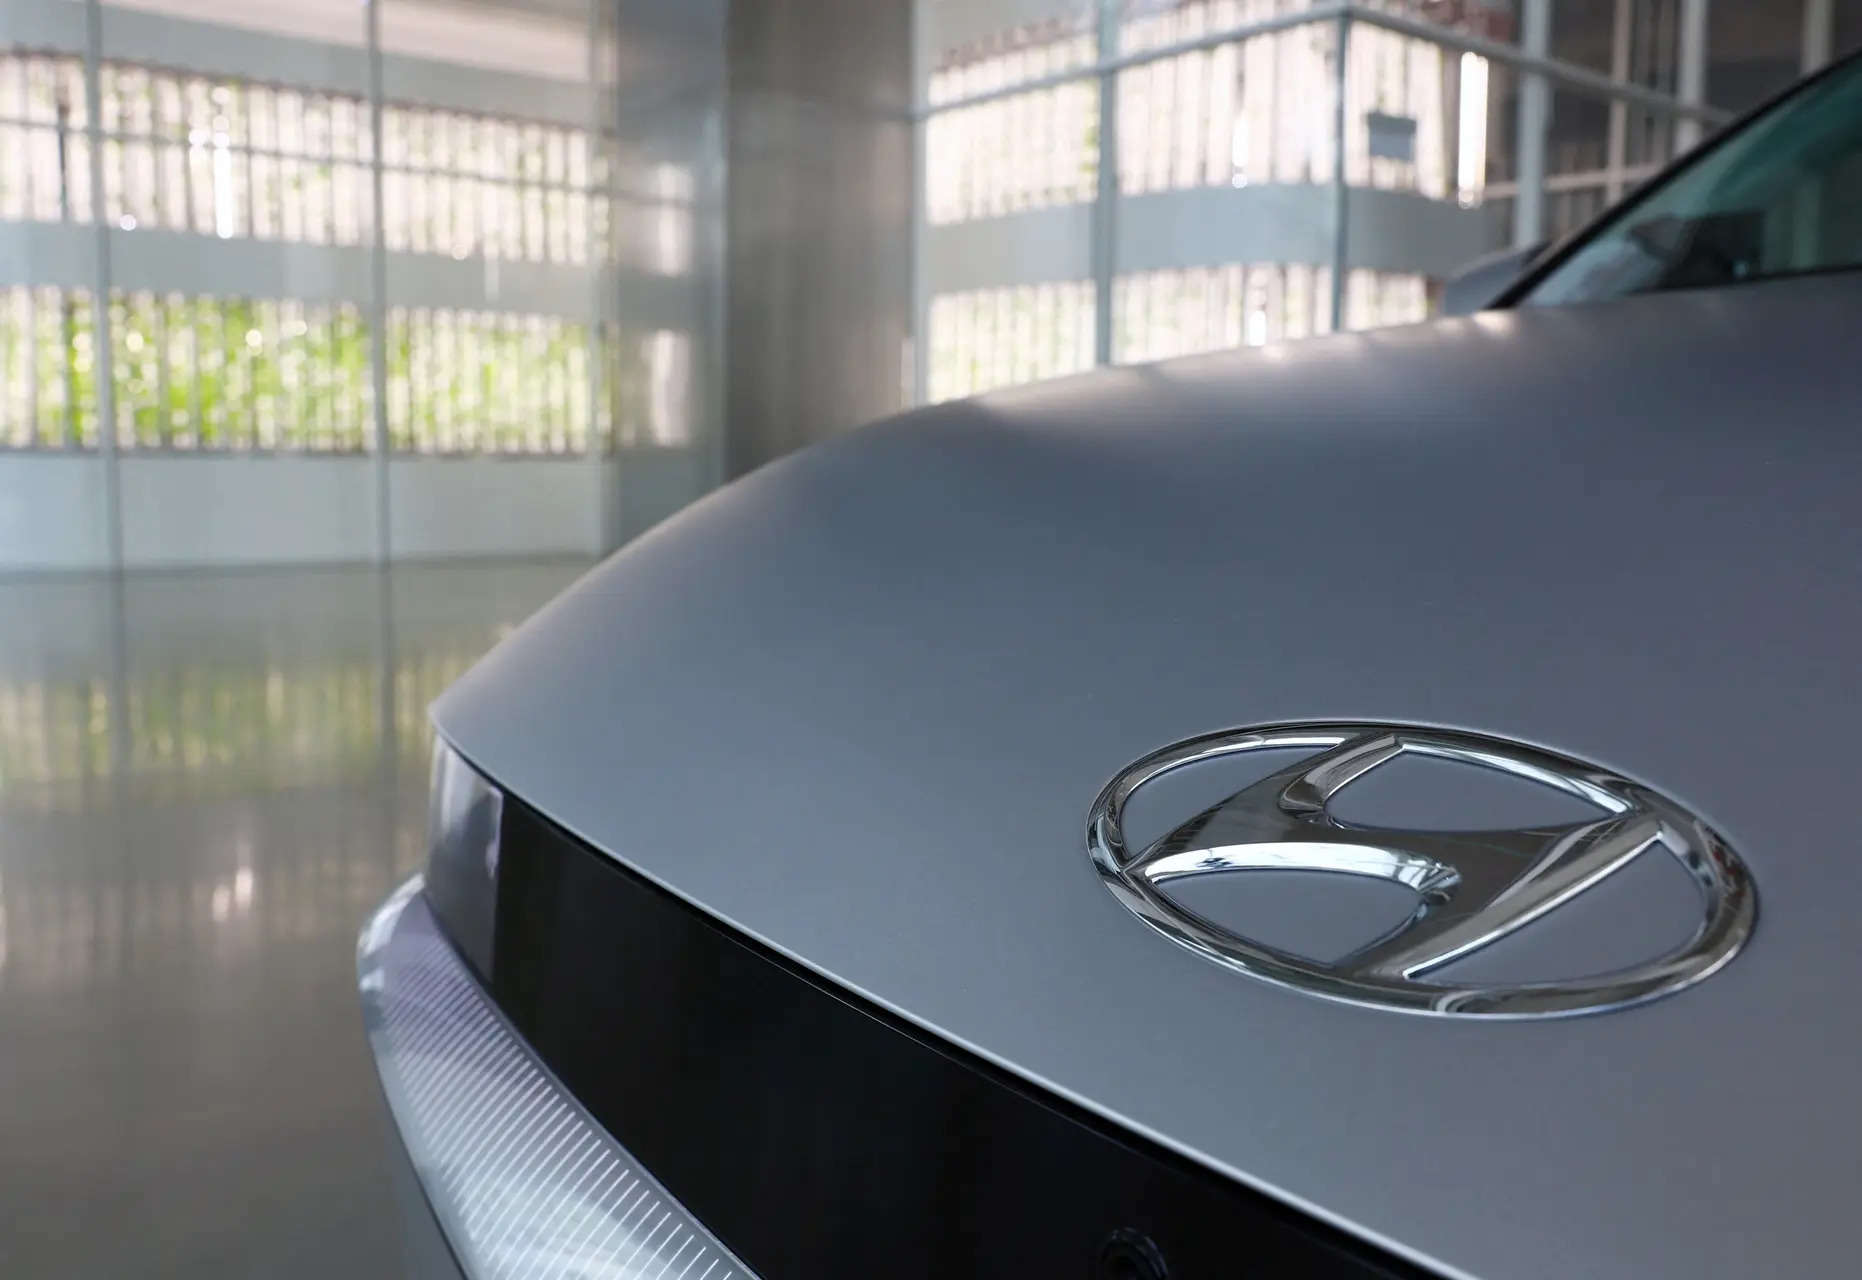 Frequent policy changes a worry, impact investment, says Hyundai